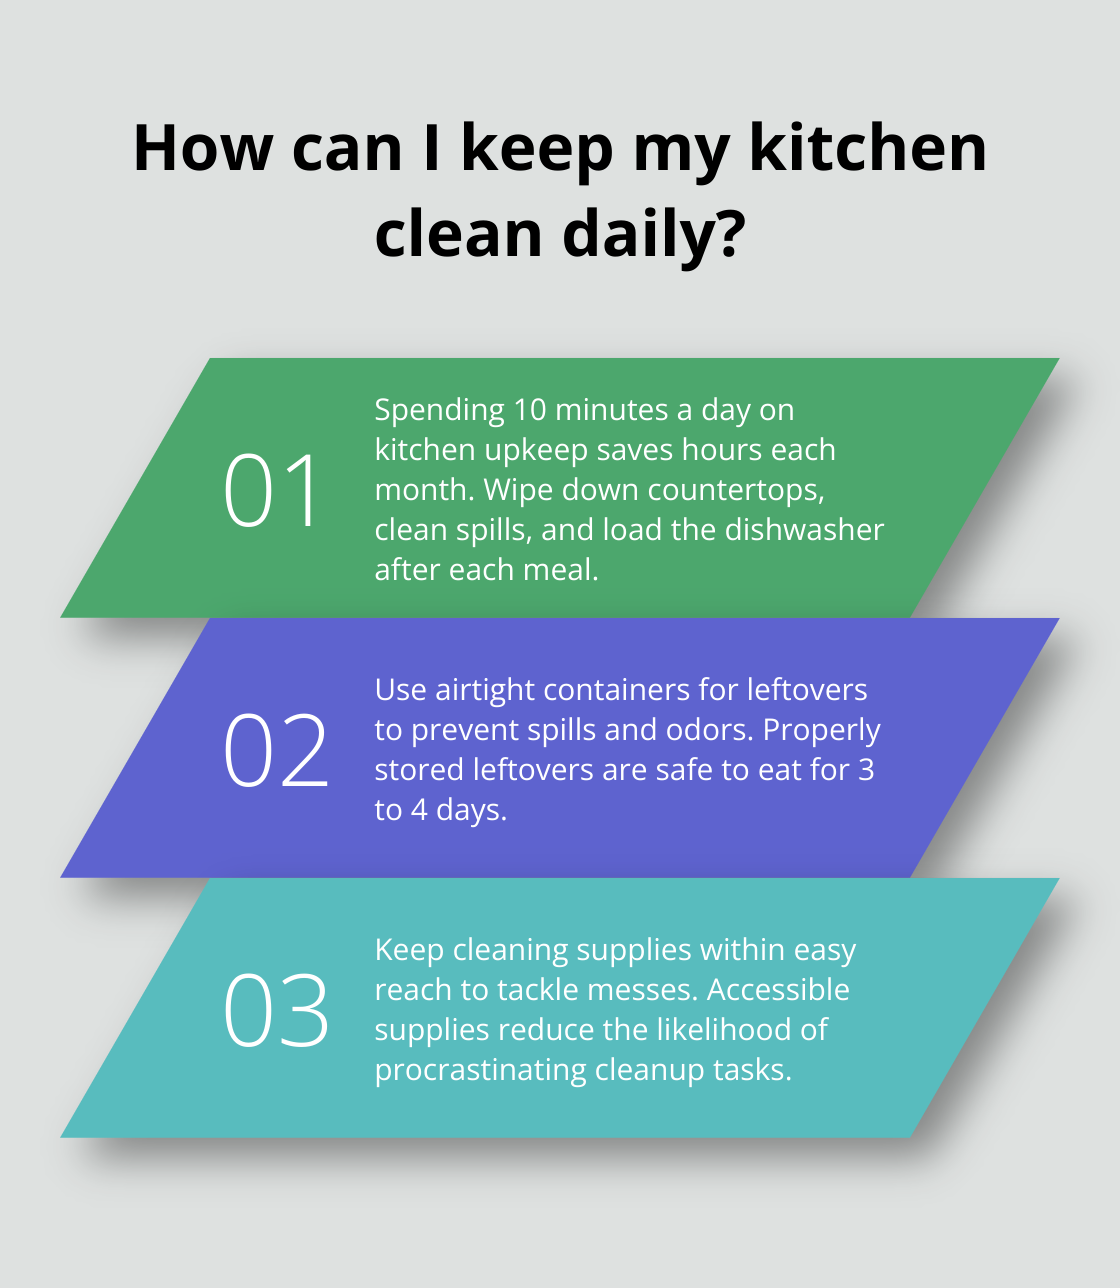 Fact - How can I keep my kitchen clean daily?